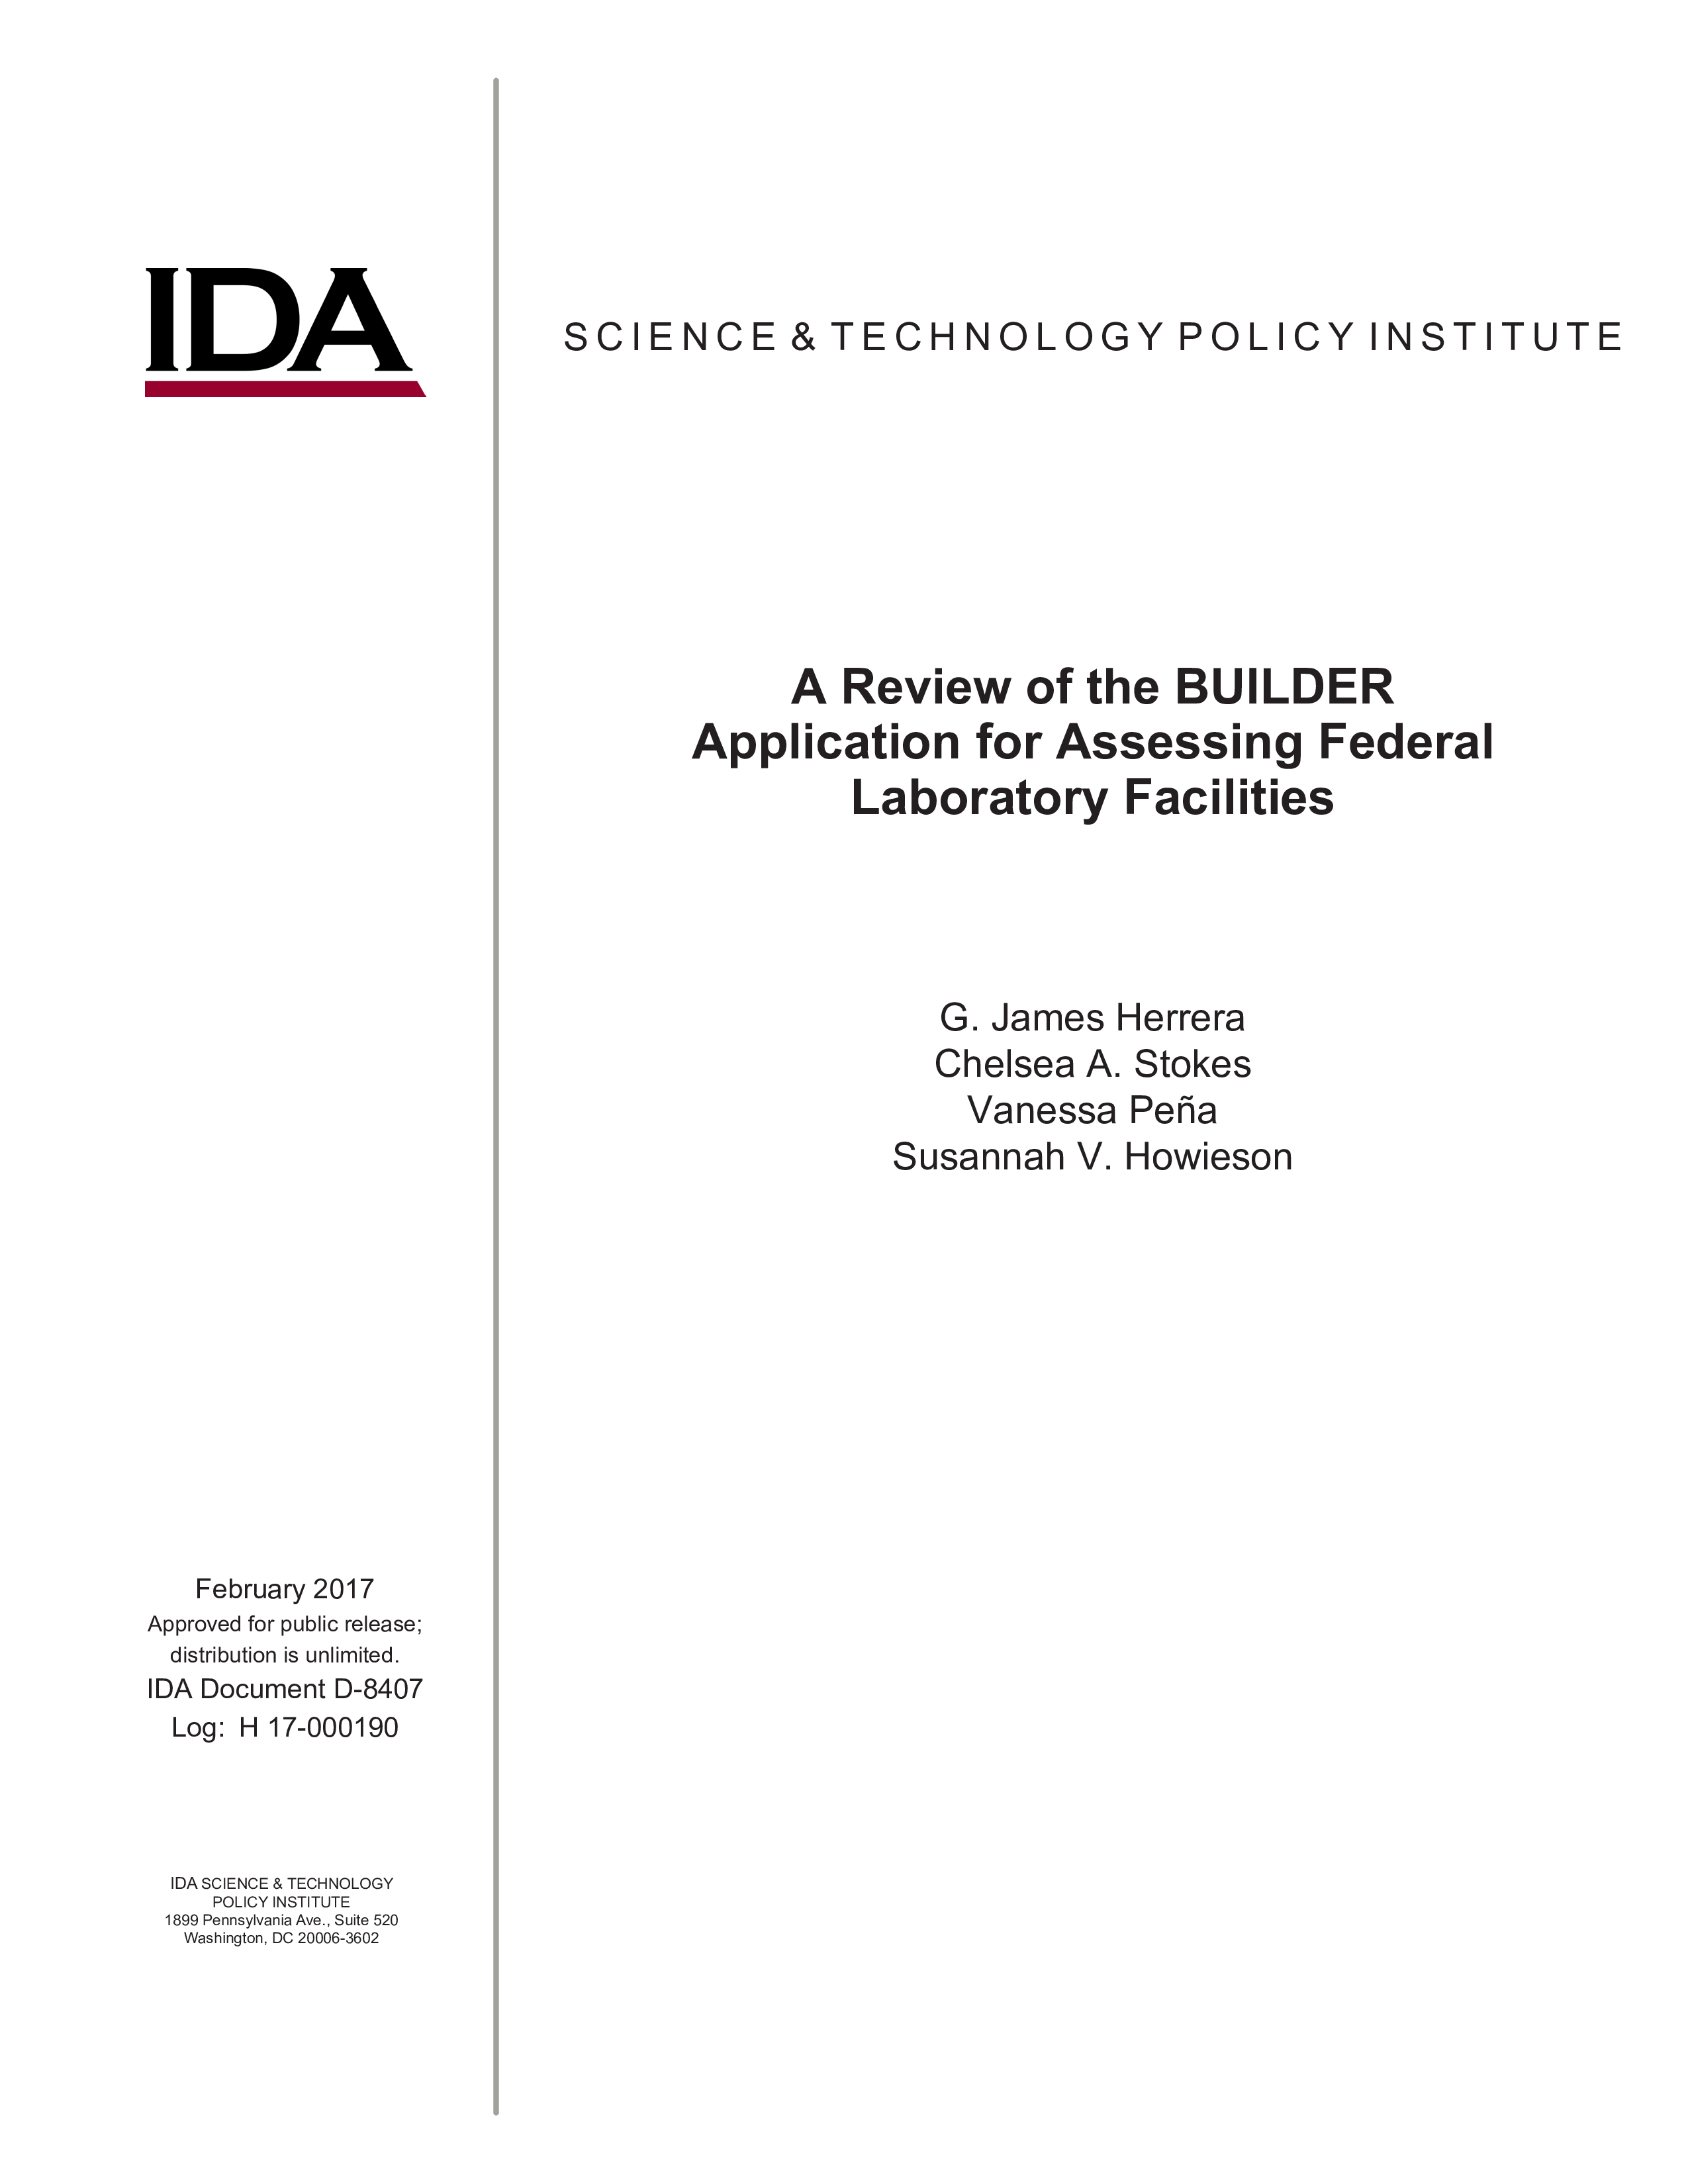 A Review of the BUILDER Application for Assessing Federal Laboratory Facilities